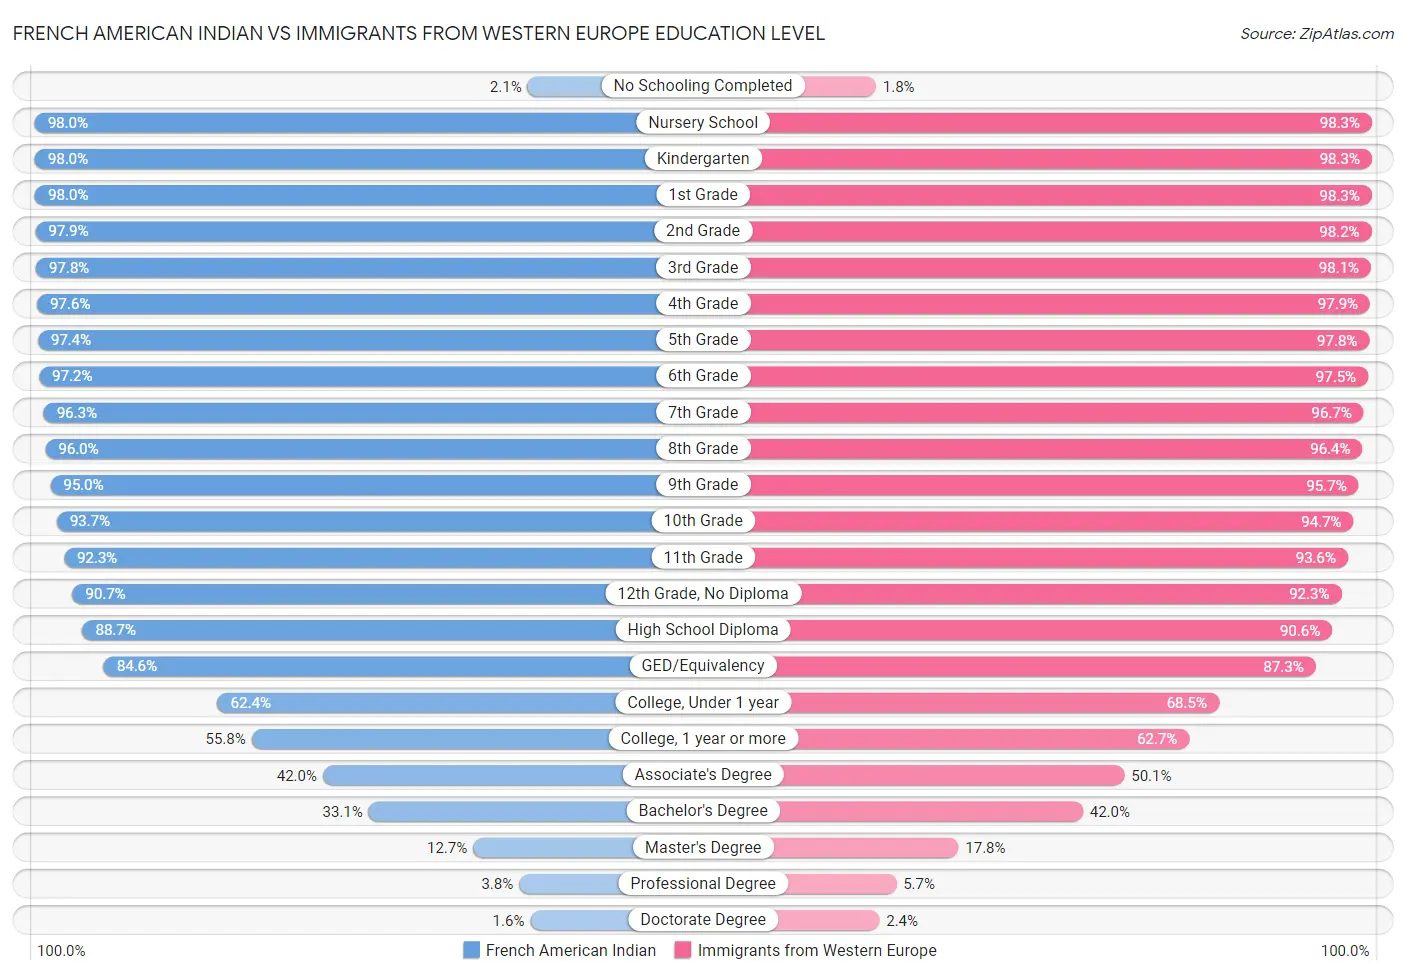 French American Indian vs Immigrants from Western Europe Education Level